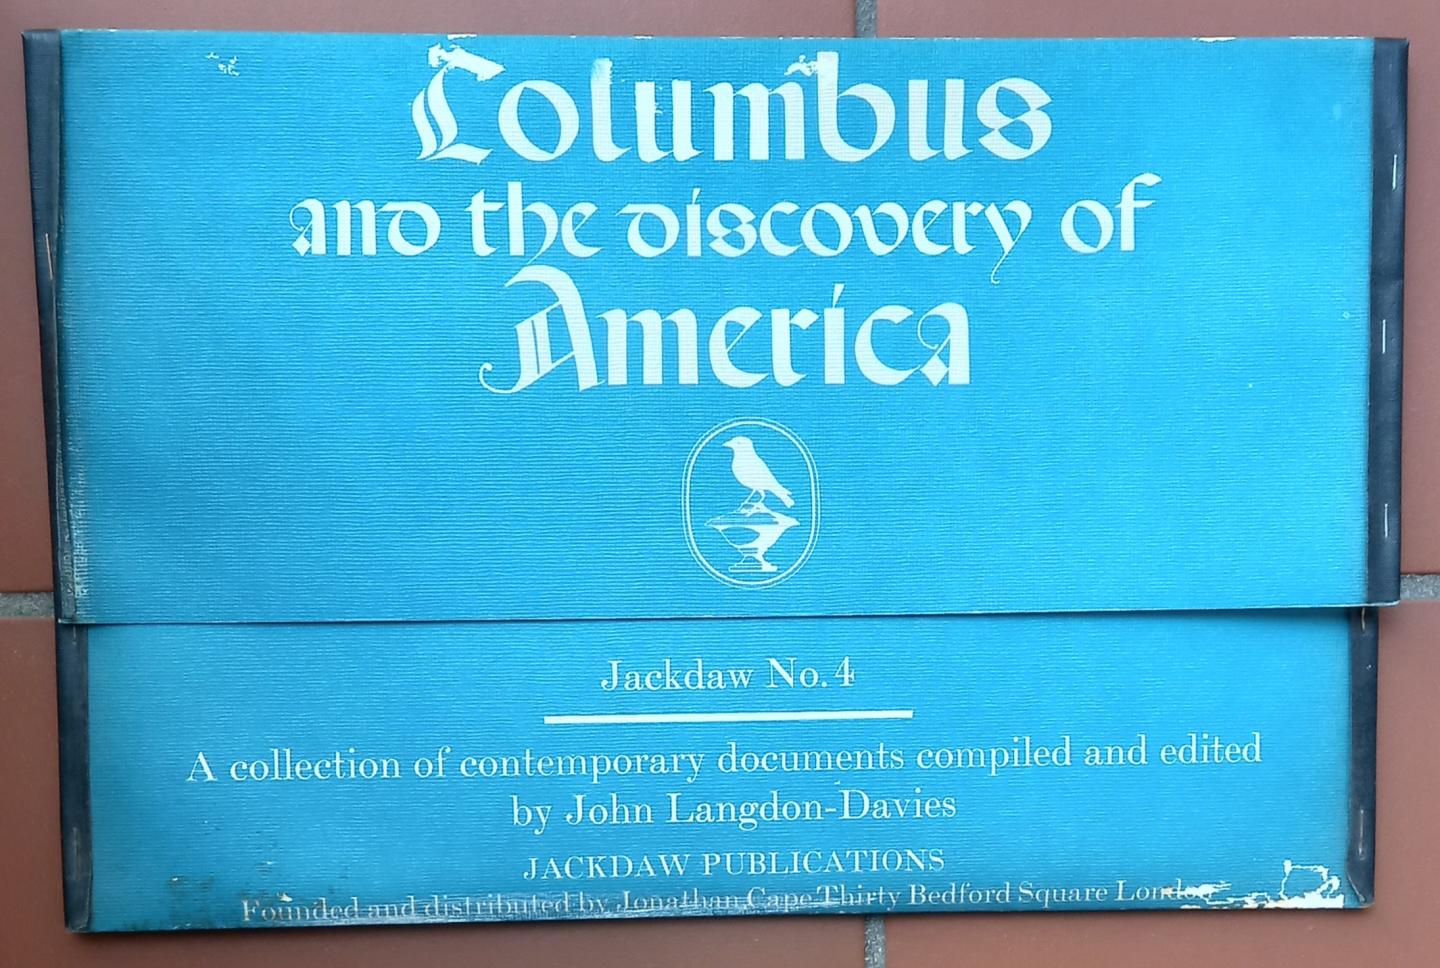 Langdon-Davies, John - Columbus and the discovery of America (A collection of contemporary documents)